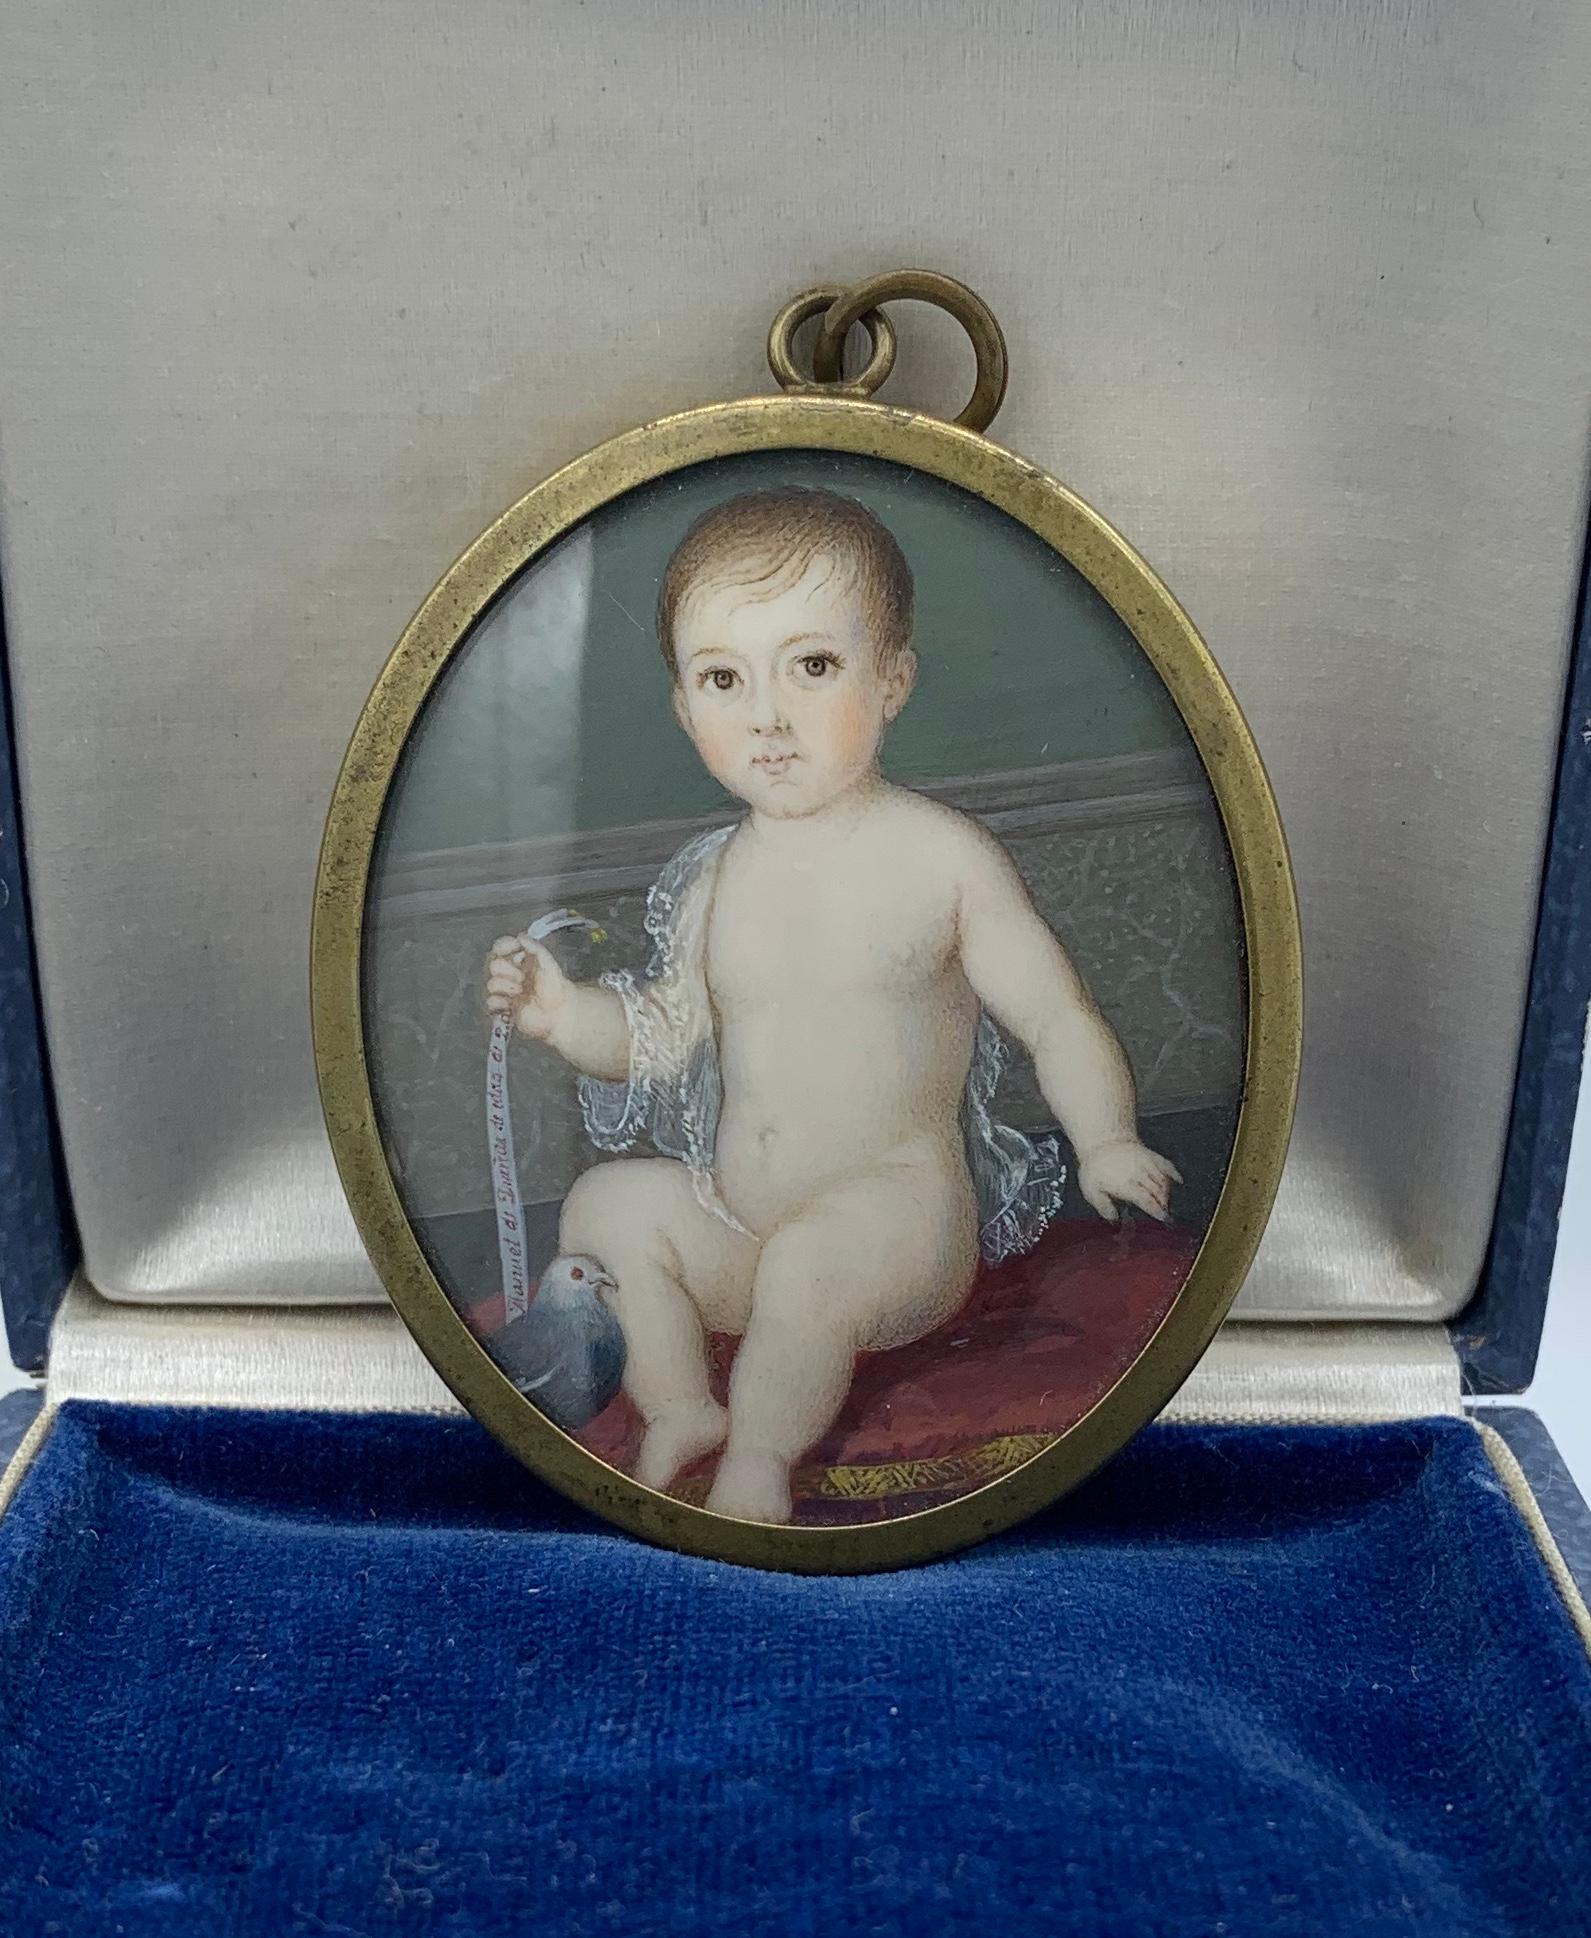 This is a very early and rare Museum Quality Georgian Locket Pendant Necklace with an extraordinary hand painted portrait miniature of a child with a dove bird.  The portrait miniature is of the highest quality.  The face of the child is exquisite